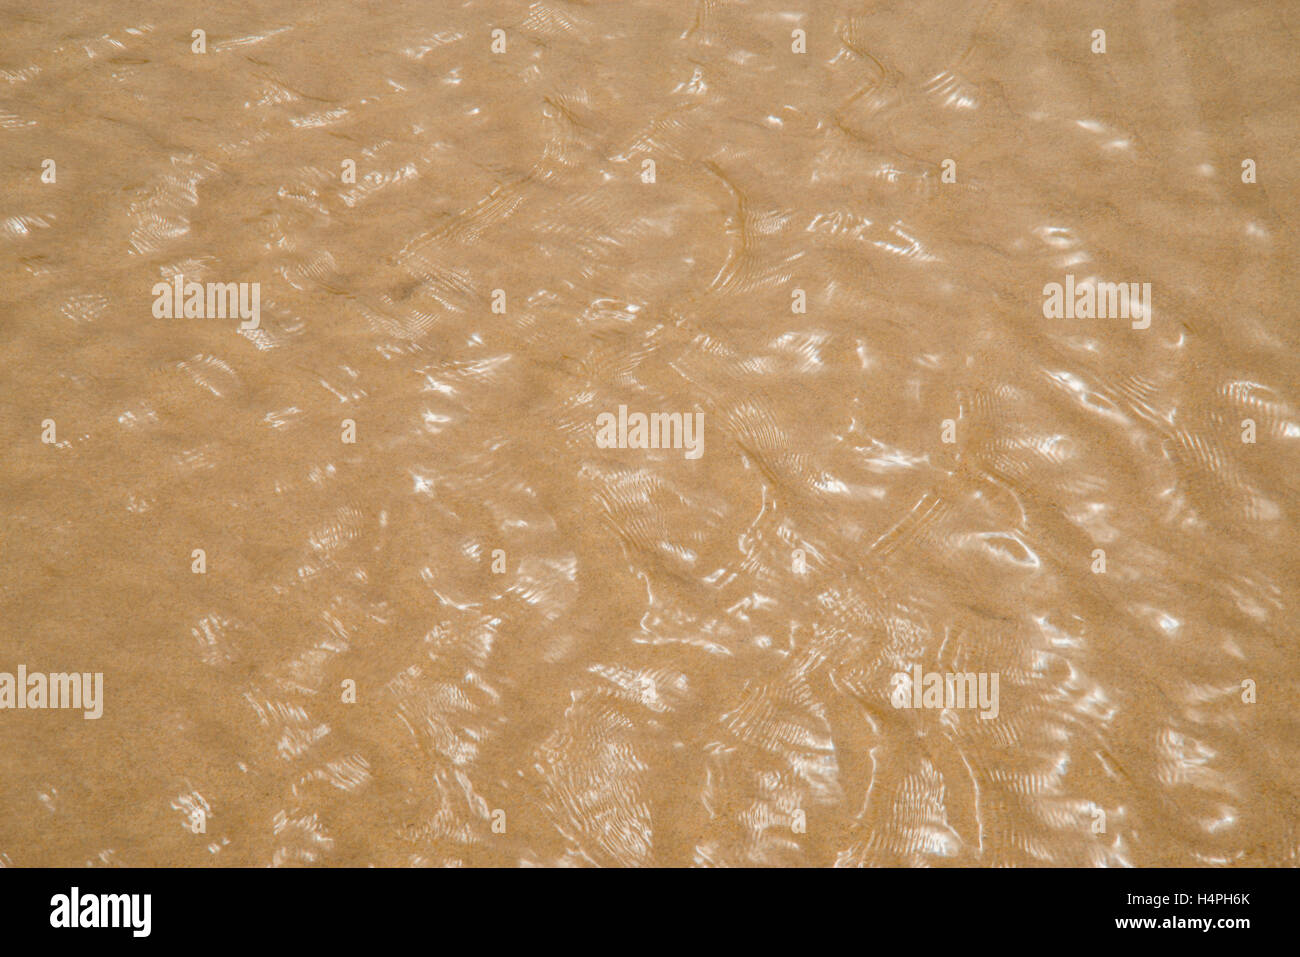 Ripples on sand viewed through the water. Stock Photo